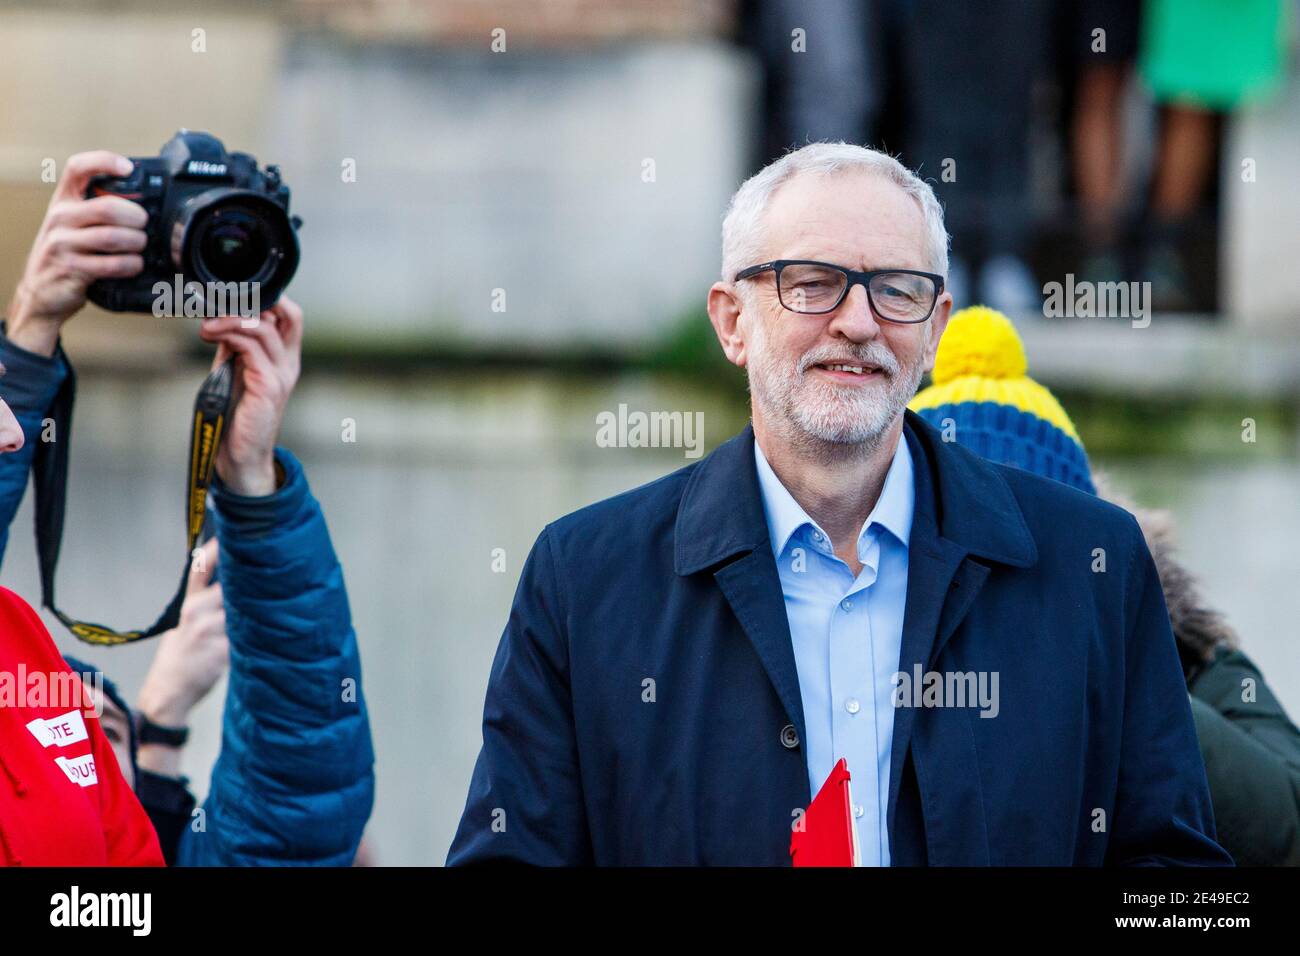 Bristol, UK. 9th Dec, 2019. Jeremy Corbyn is pictured speaking to supporters at a rally in College Green, Bristol. Stock Photo